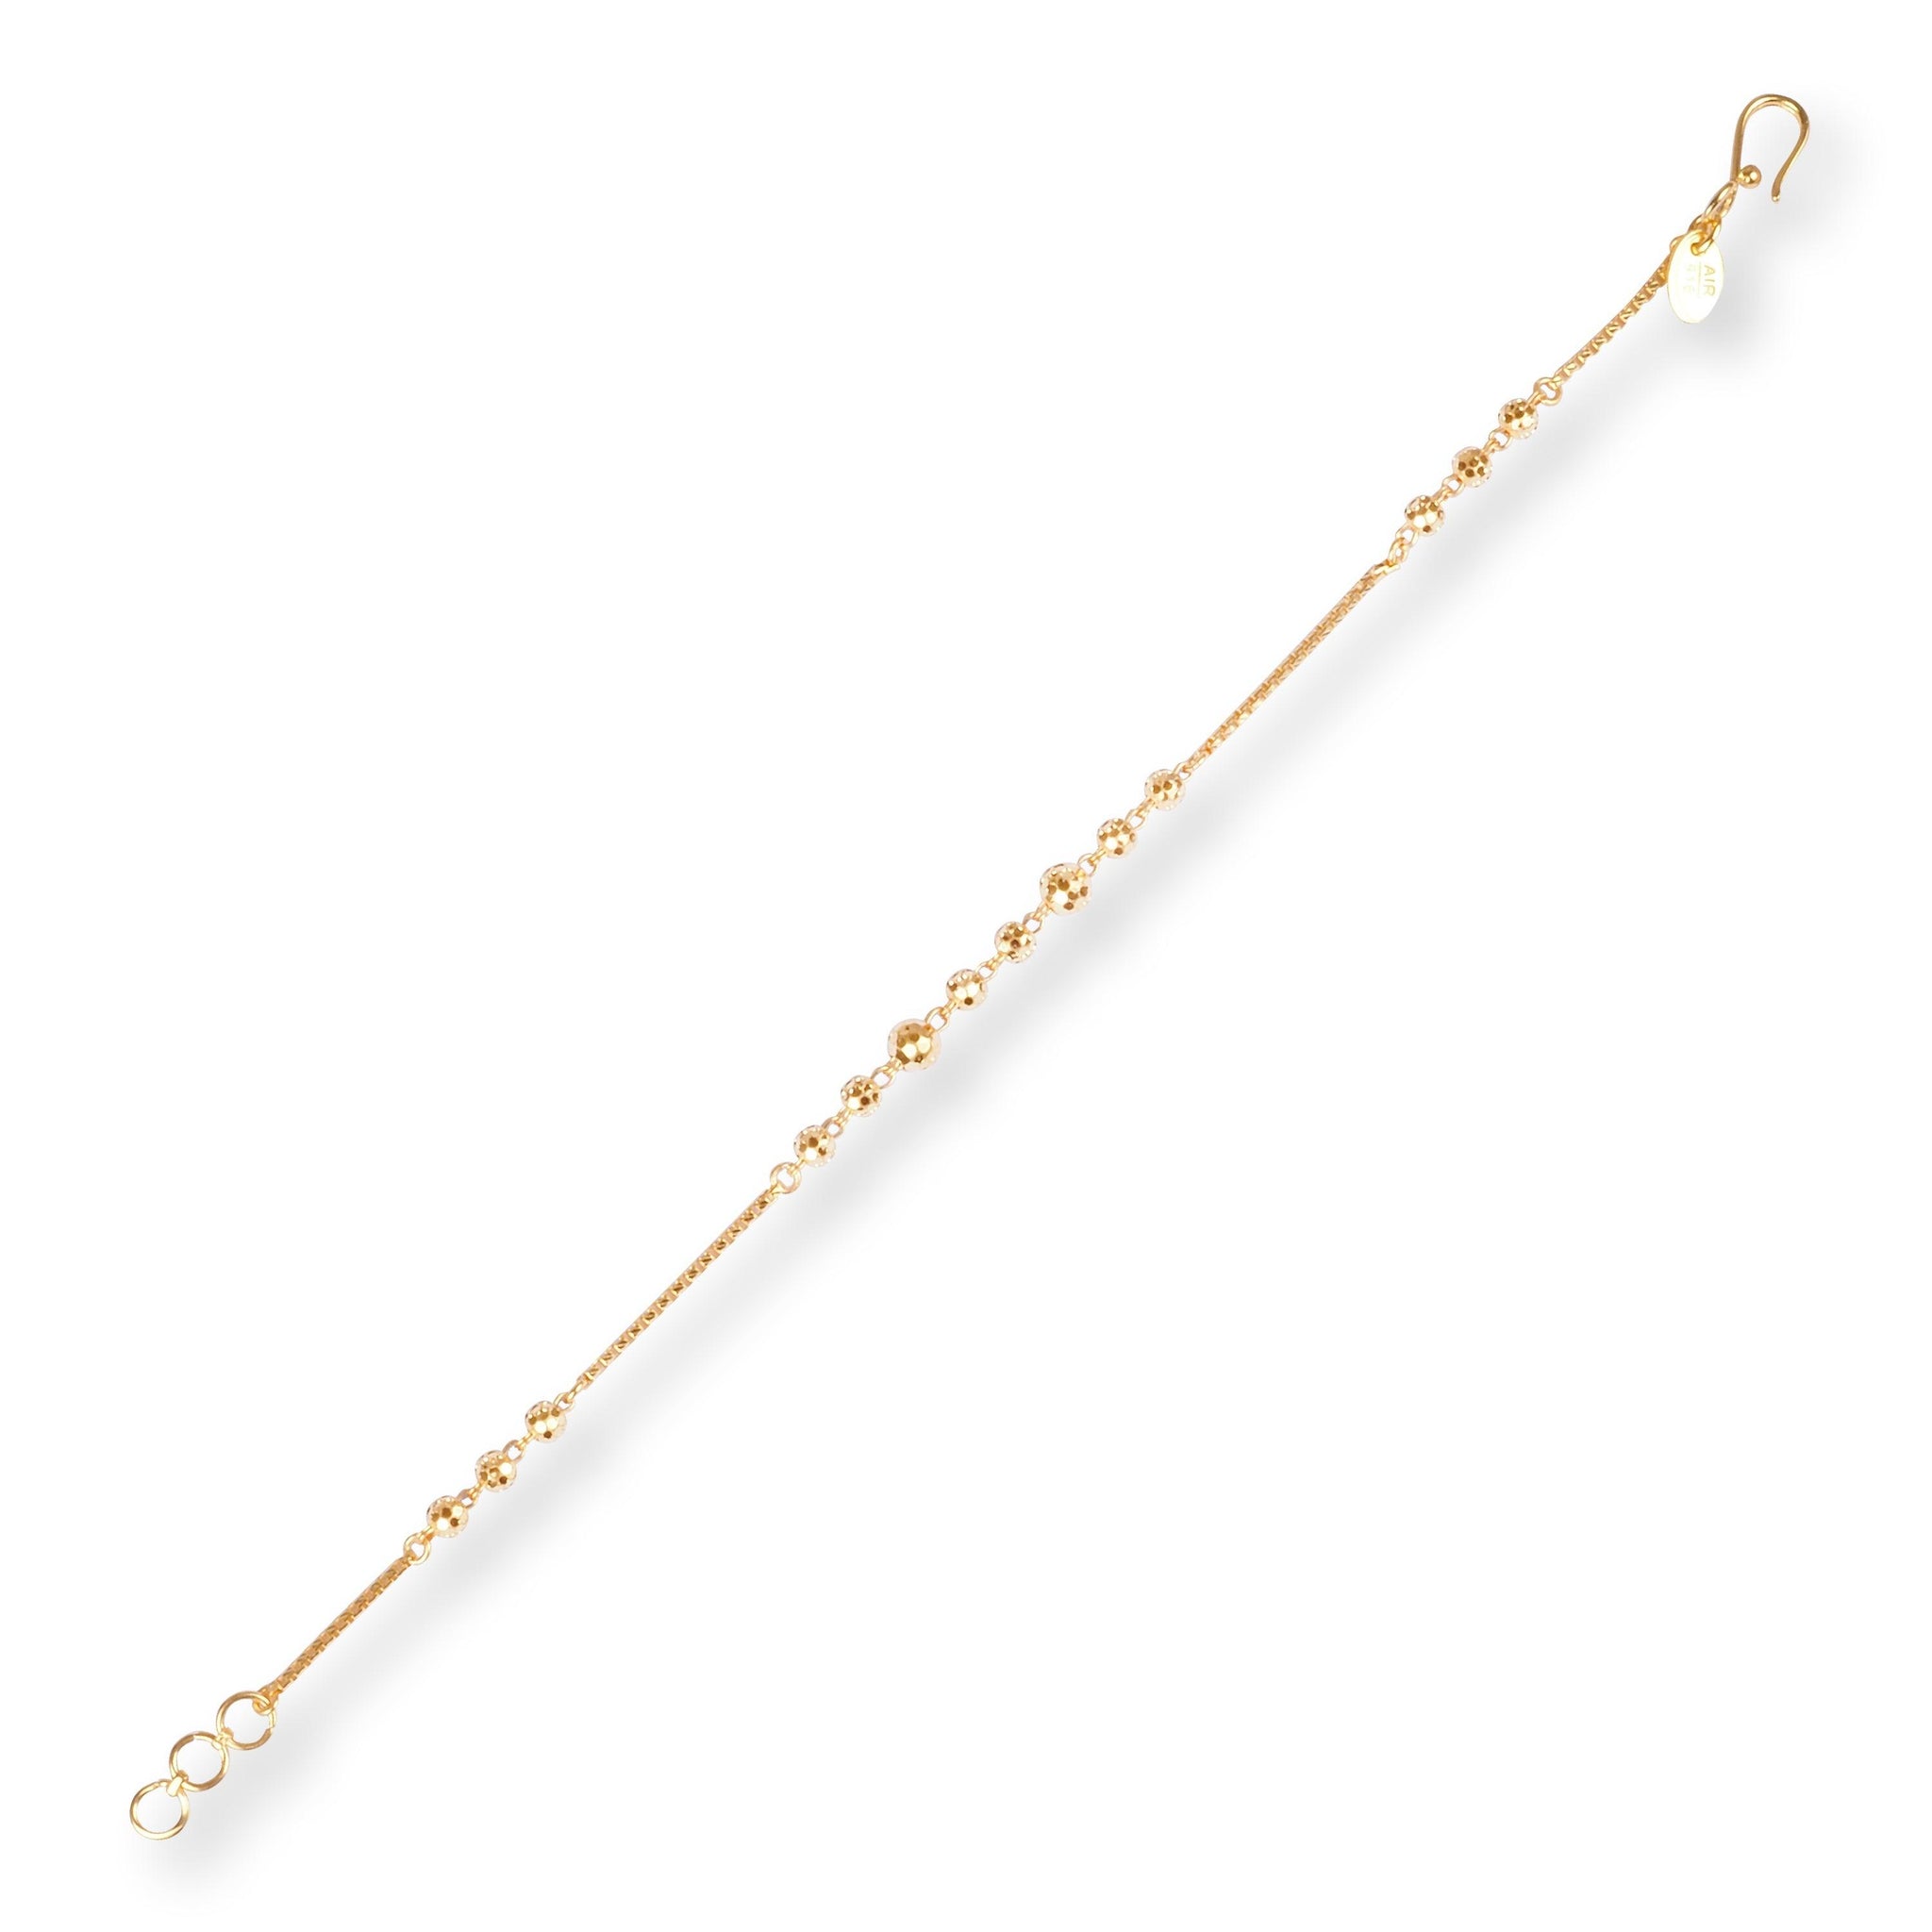 22ct Gold Bracelet with Diamond Cut Beads and Hook Clasp LBR-8492